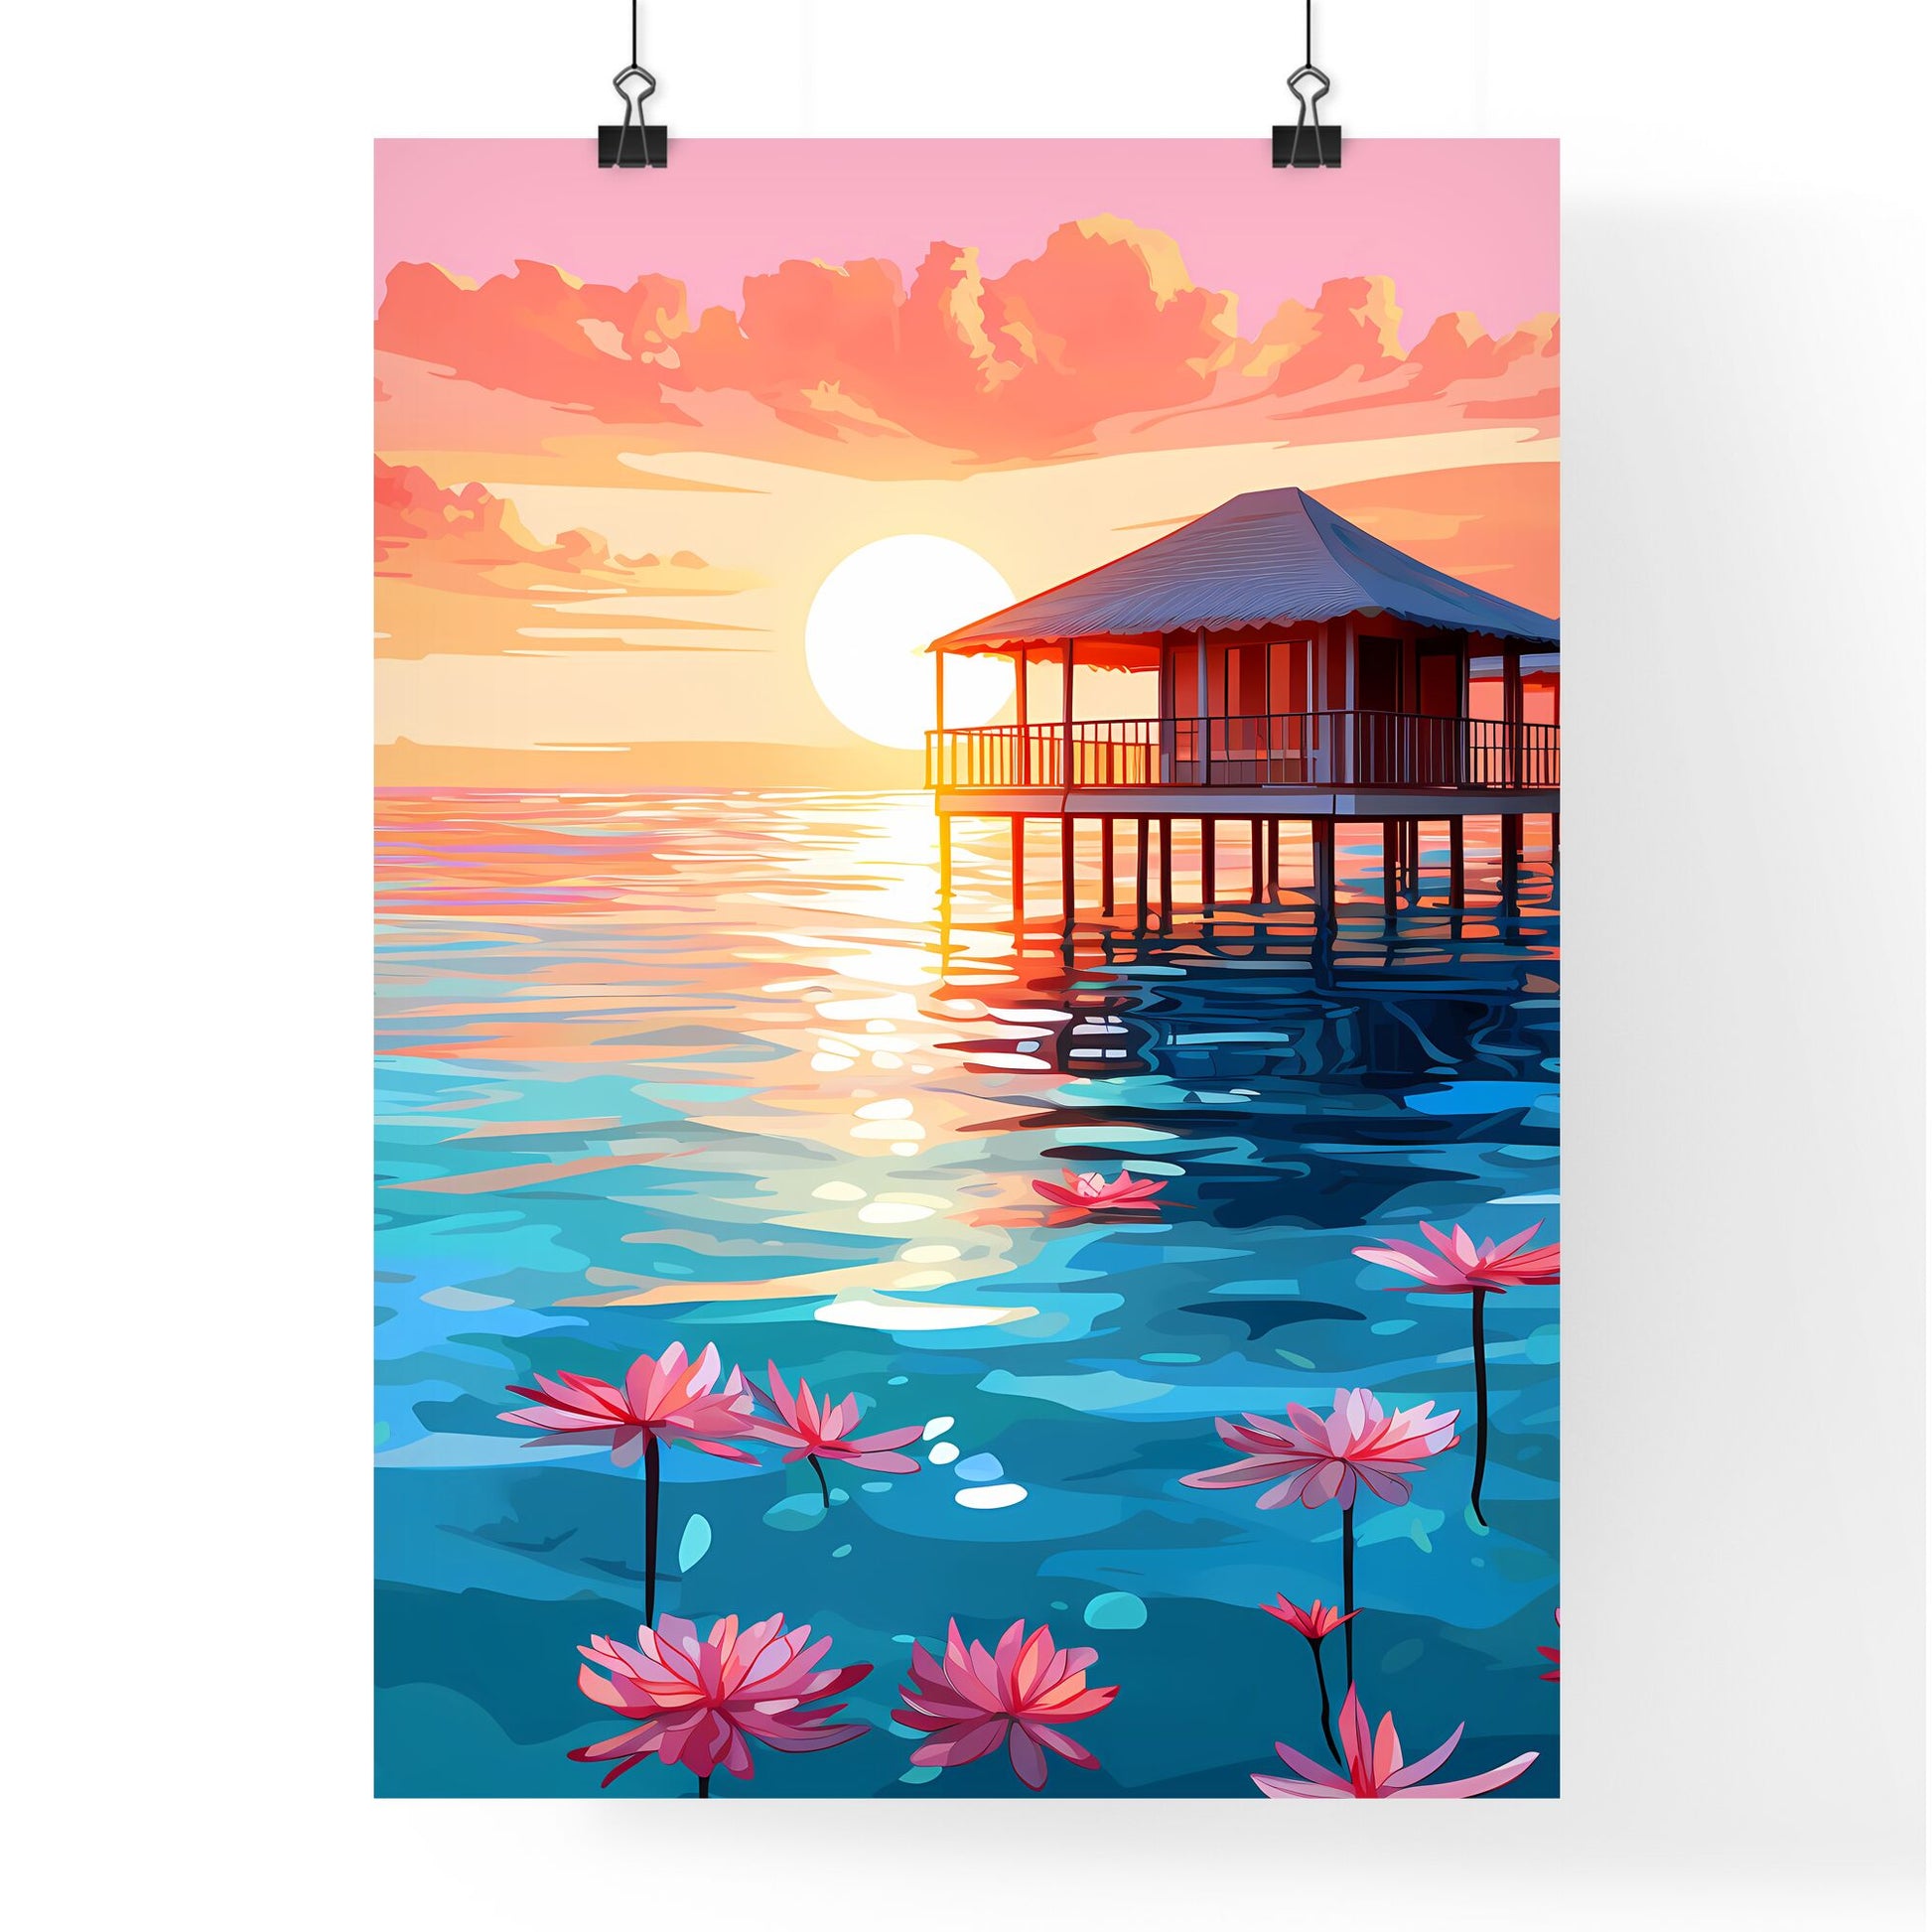 Building On Stilts In Water With Flowers Art Print Default Title